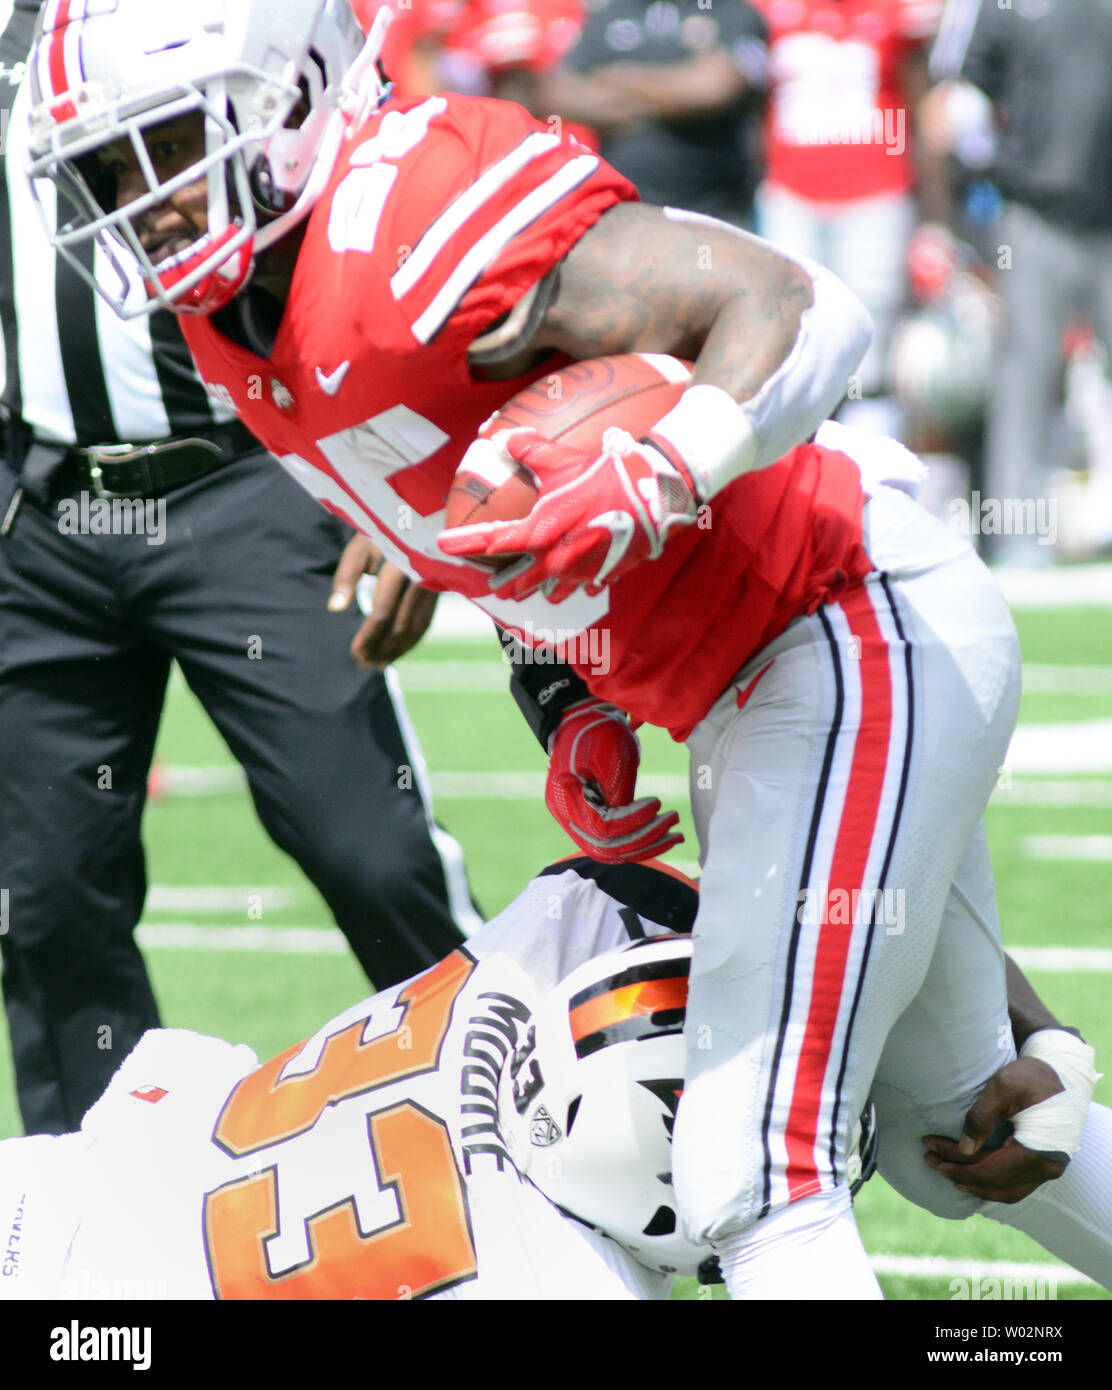 Ohio State Buckeyes running back Mike Weber (25) evades the tackle of Oregon State Beavers safety Jalen Moore (33) and runs 16 yards for a touchdown in the first quarter against Oregon State Beavers at Ohio Stadium in Columbus, Ohio on September1, 2018. Photo by Archie Carpenter/UPI Stock Photo